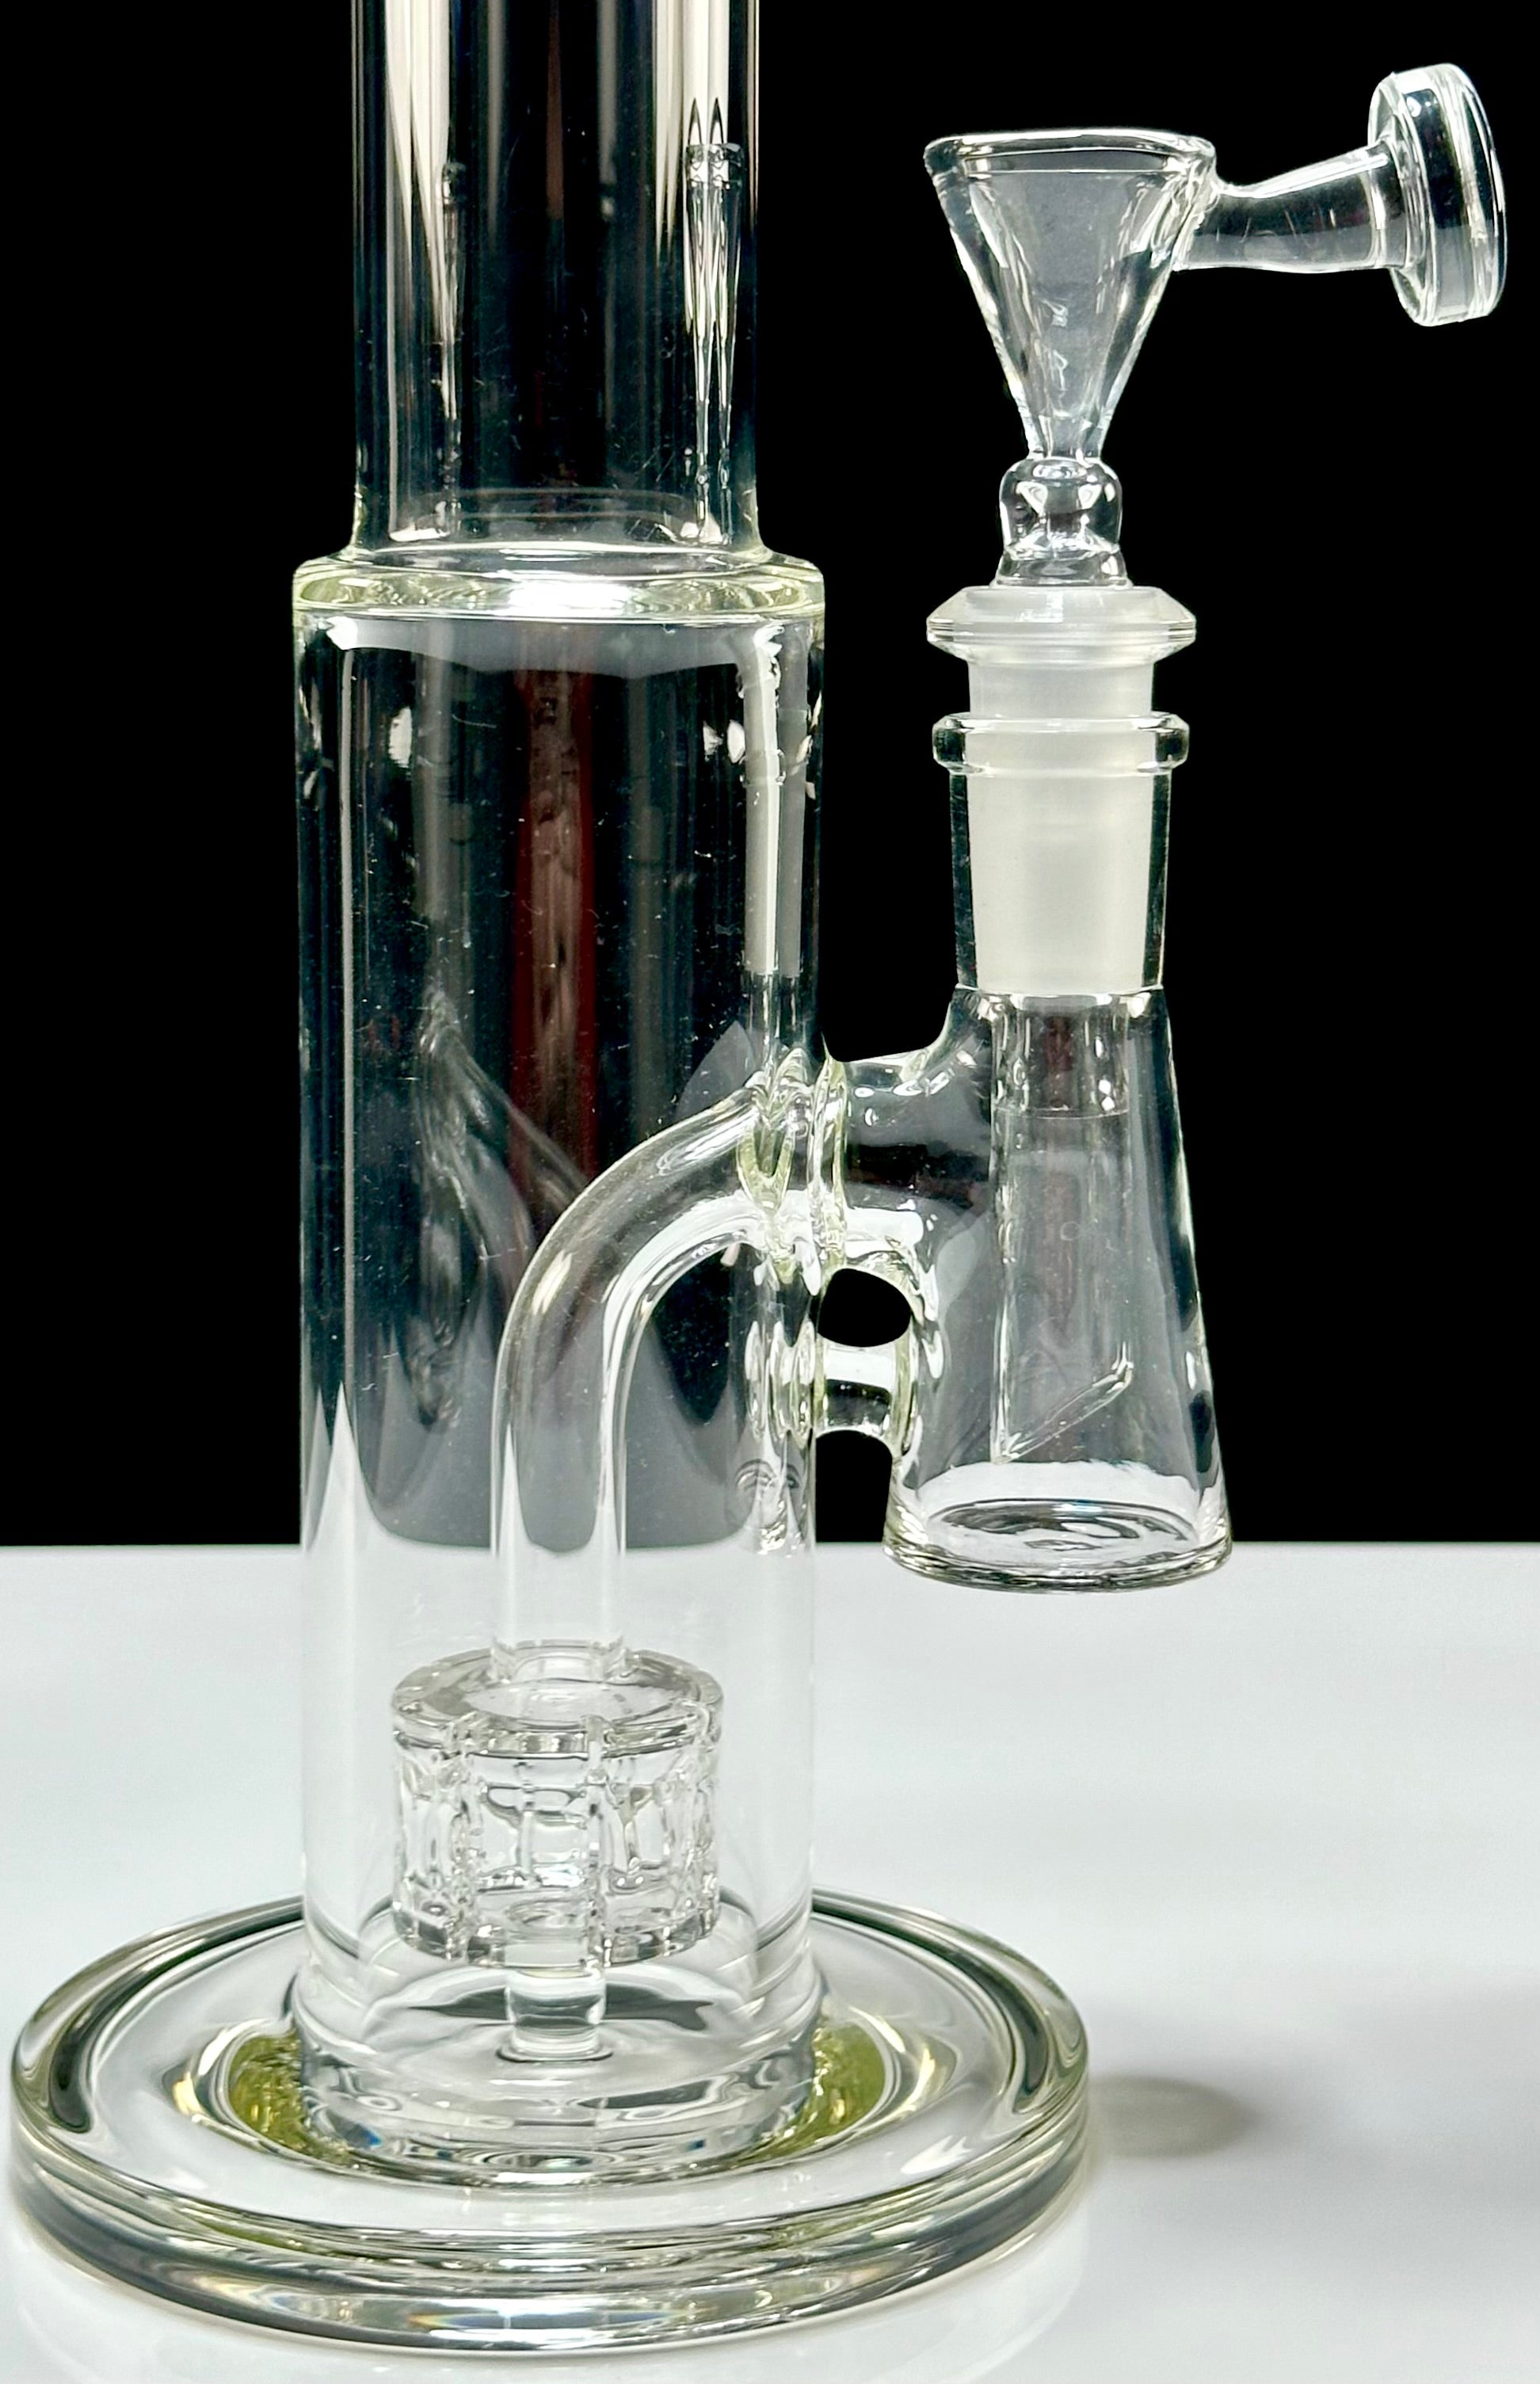 Williams Glass Scepter 14mm with Built-In Dry Catcher